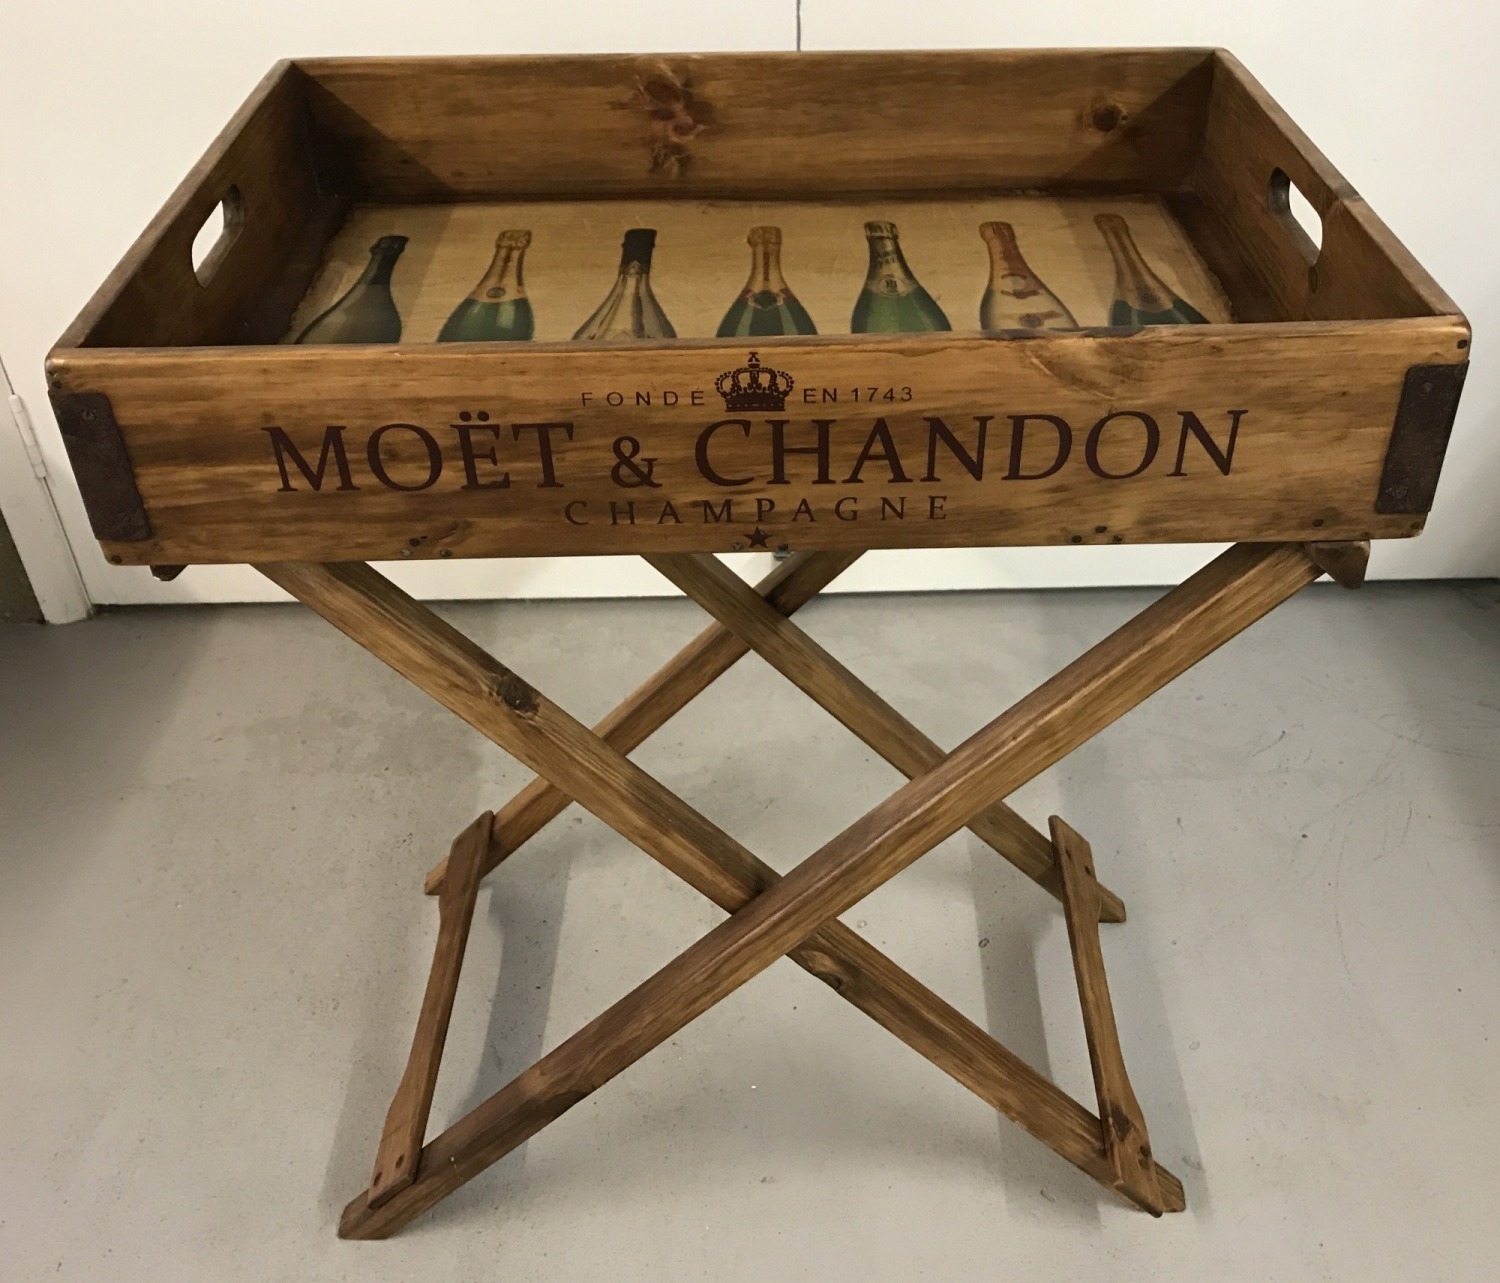 A new wooden 2 handled champagne butlers tray.